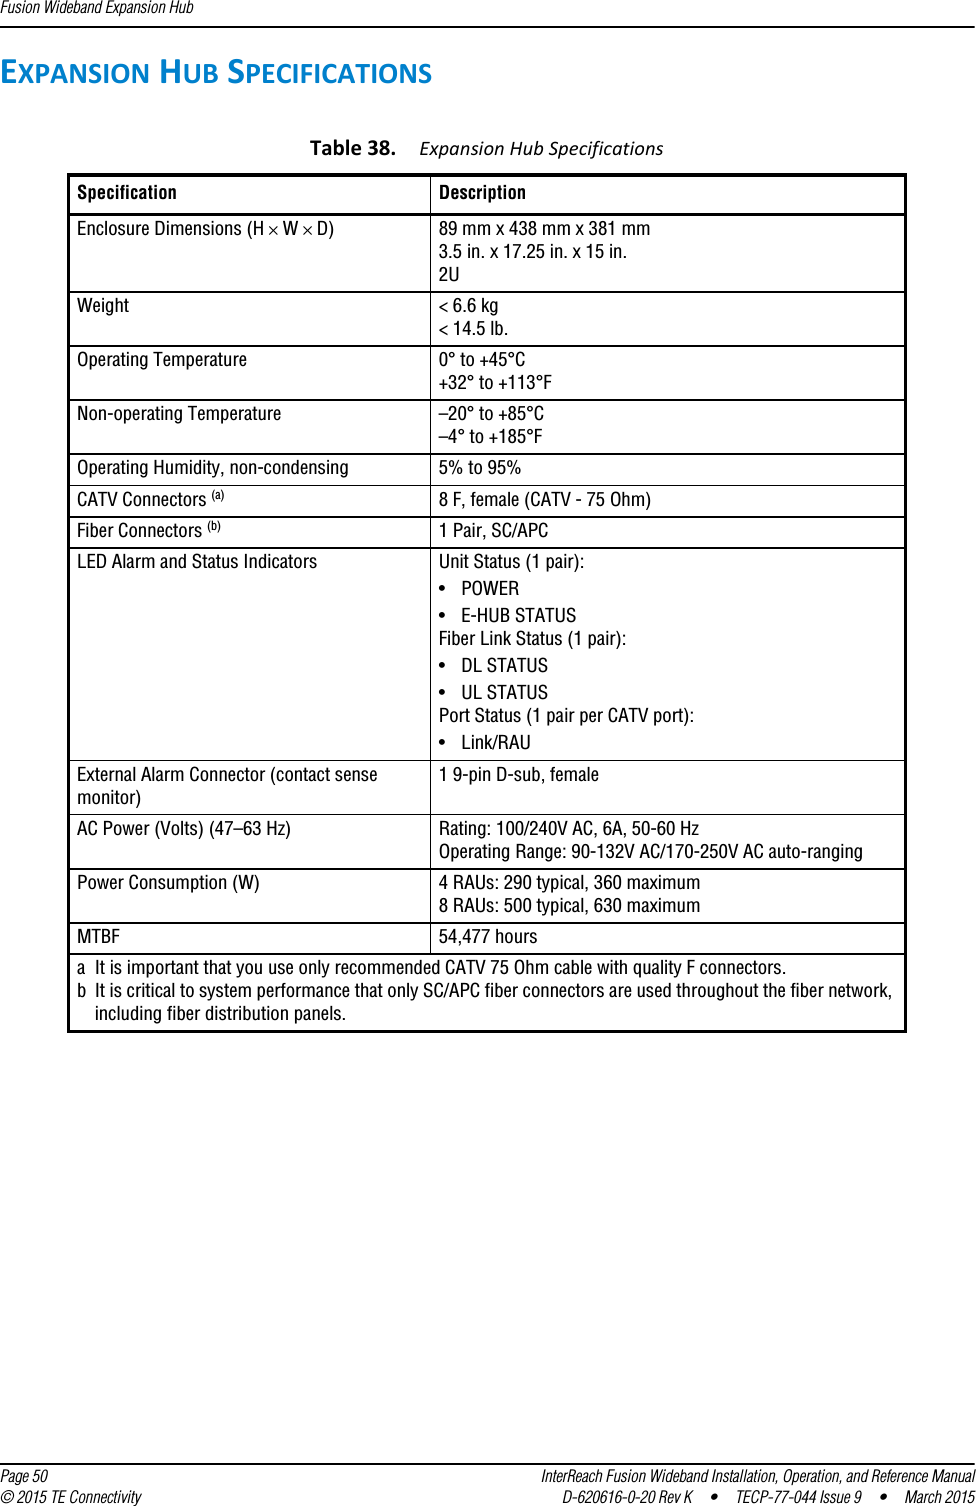 Fusion Wideband Expansion Hub  Page 50 InterReach Fusion Wideband Installation, Operation, and Reference Manual© 2015 TE Connectivity D-620616-0-20 Rev K  •  TECP-77-044 Issue 9  •  March 2015EXPANSION HUB SPECIFICATIONSTable 38. Expansion Hub SpecificationsSpecification DescriptionEnclosure Dimensions (H × W × D) 89 mm x 438 mm x 381 mm 3.5 in. x 17.25 in. x 15 in.2UWeight &lt; 6.6 kg &lt; 14.5 lb.Operating Temperature 0° to +45°C +32° to +113°FNon-operating Temperature –20° to +85°C –4° to +185°FOperating Humidity, non-condensing 5% to 95%CATV Connectors (a) 8 F, female (CATV - 75 Ohm)Fiber Connectors (b) 1 Pair, SC/APCLED Alarm and Status Indicators Unit Status (1 pair):•POWER•E-HUB STATUSFiber Link Status (1 pair):•DL STATUS• UL STATUSPort Status (1 pair per CATV port):•Link/RAUExternal Alarm Connector (contact sense monitor)1 9-pin D-sub, femaleAC Power (Volts) (47–63 Hz) Rating: 100/240V AC, 6A, 50-60 HzOperating Range: 90-132V AC/170-250V AC auto-rangingPower Consumption (W) 4 RAUs: 290 typical, 360 maximum 8 RAUs: 500 typical, 630 maximumMTBF 54,477 hoursa It is important that you use only recommended CATV 75 Ohm cable with quality F connectors.b It is critical to system performance that only SC/APC fiber connectors are used throughout the fiber network, including fiber distribution panels.